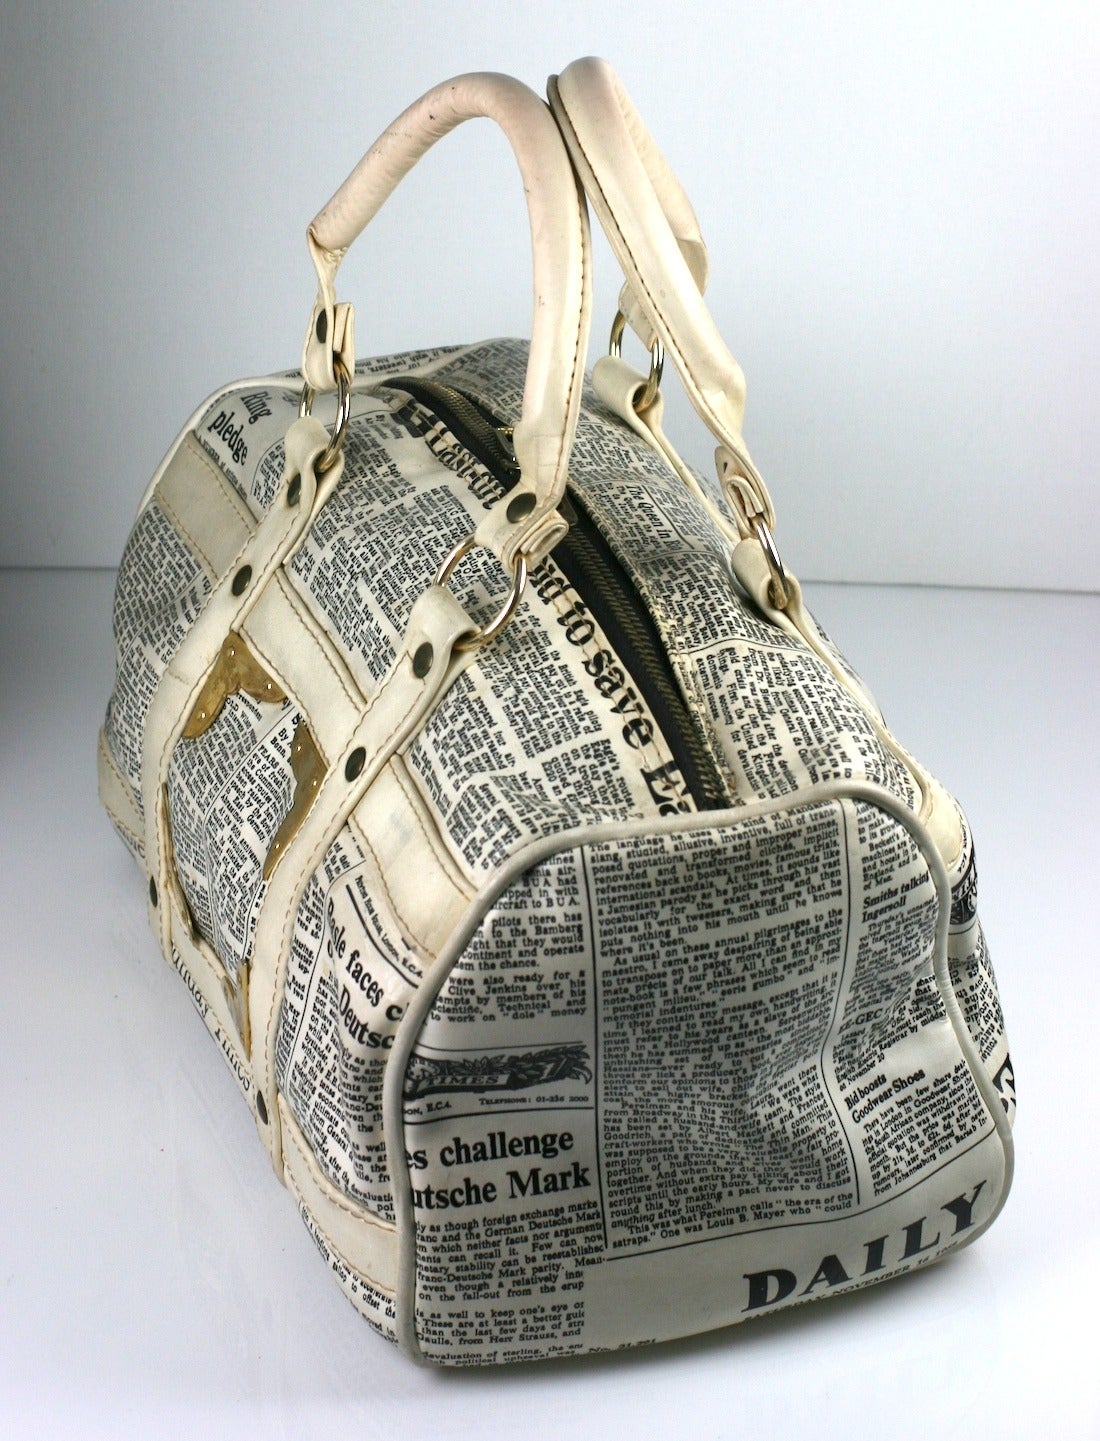 Unusual vinyl satchel made in the 1960's with newsprint articles from the UK. One article is from the 